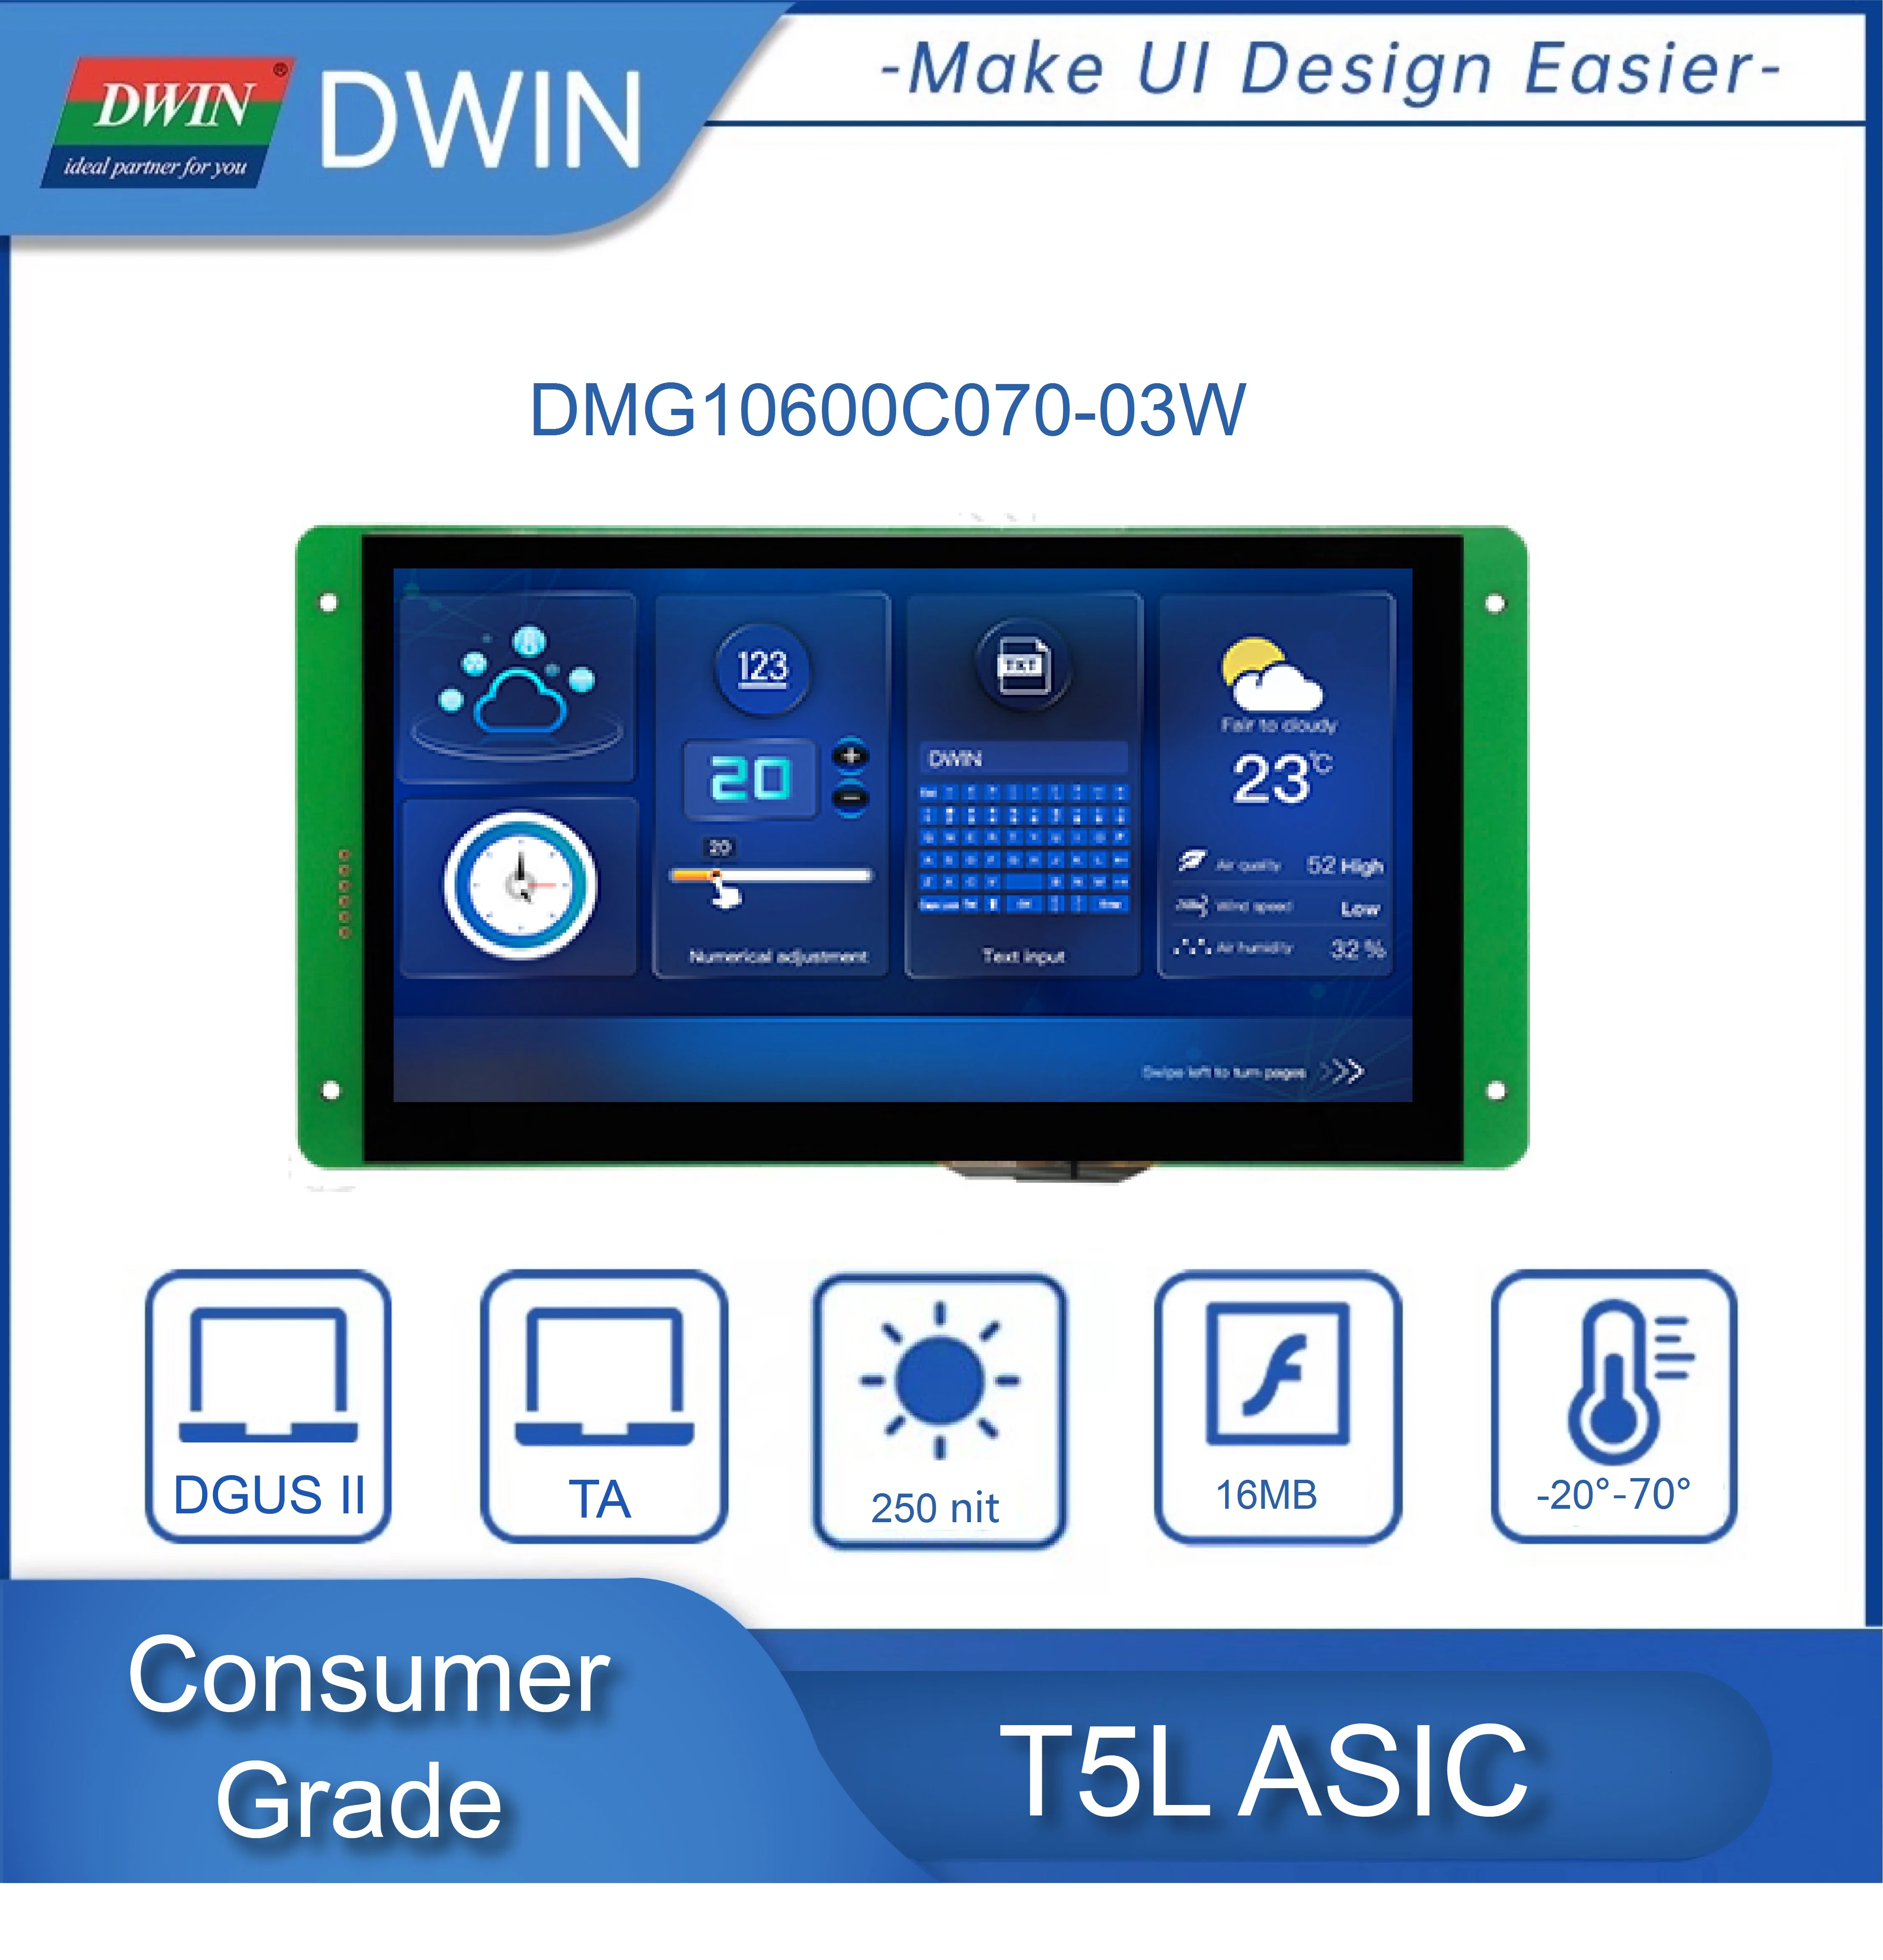 

DWIN 7.0 Inch Display 1024*RGB*600 Capacitive Touch Screen HMI Smart Module IPS-TFT-LCD, Wide Viewing Angle - DMG10600C070_03WTC